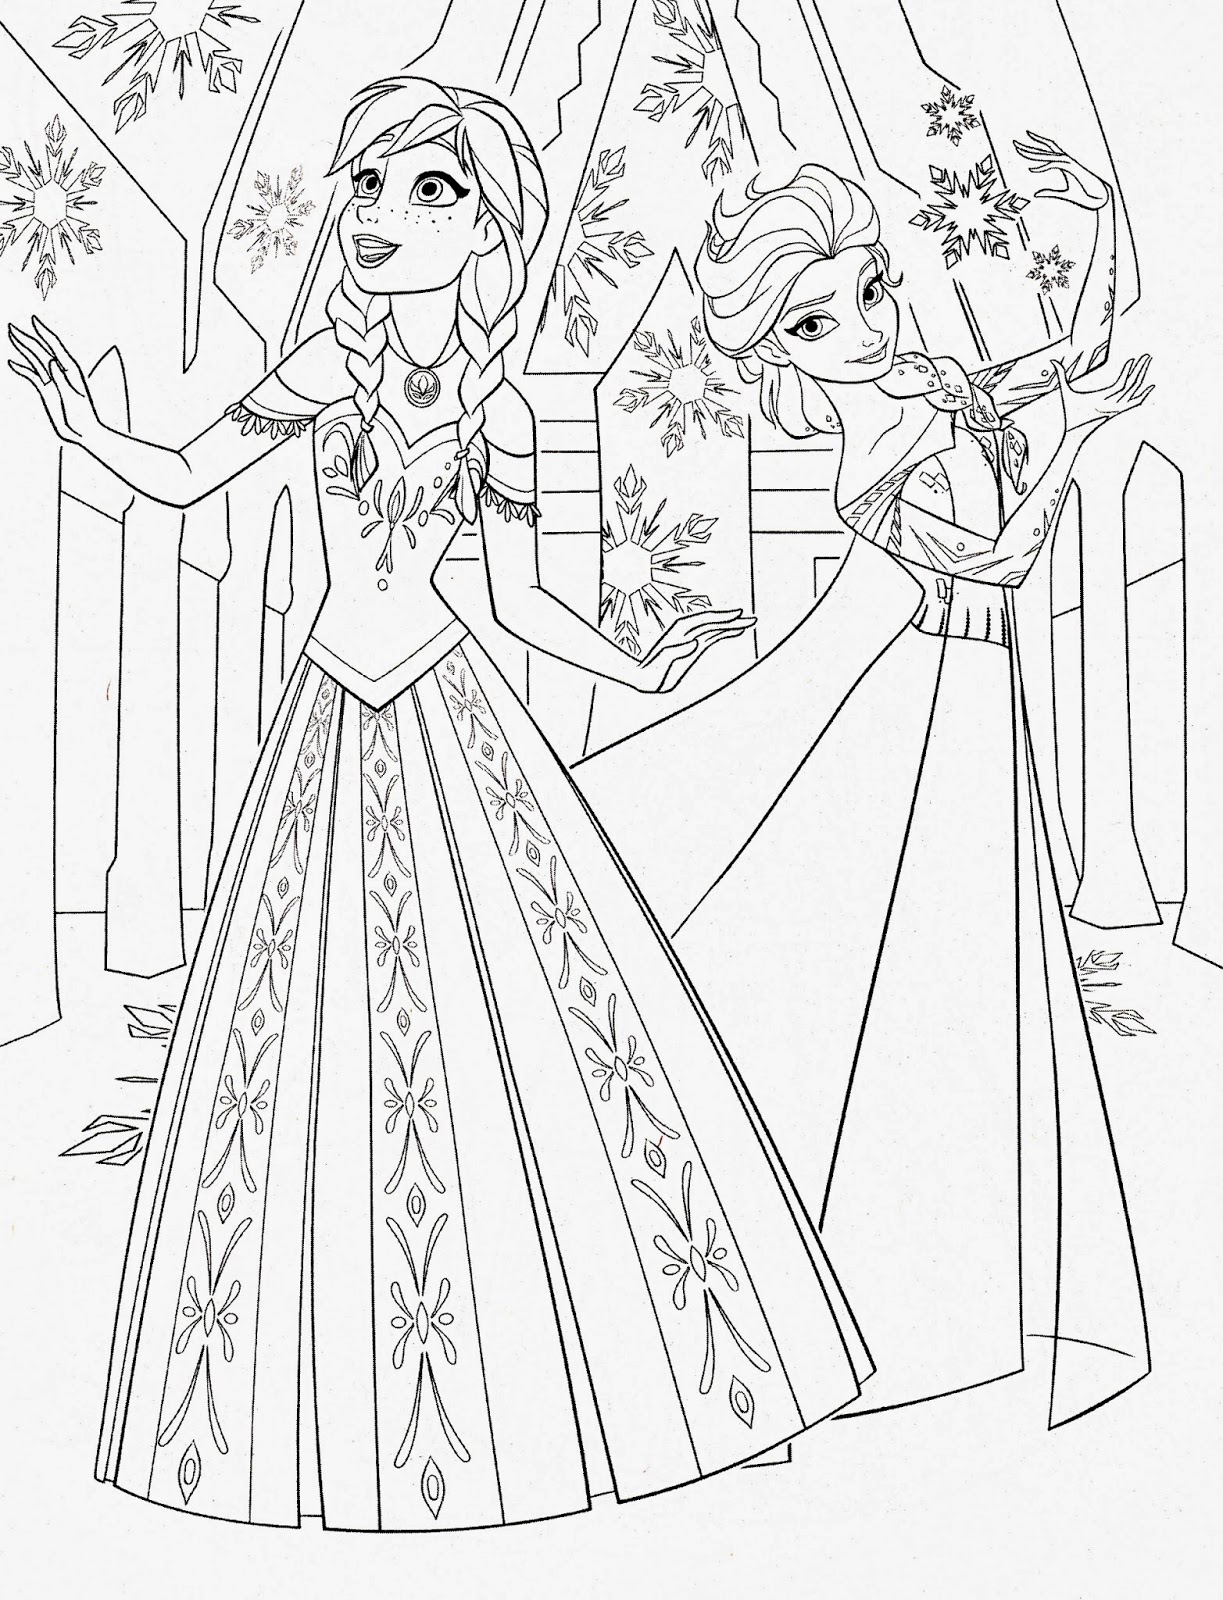 Coloring Pages: Frozen Coloring Pages Free and Printable